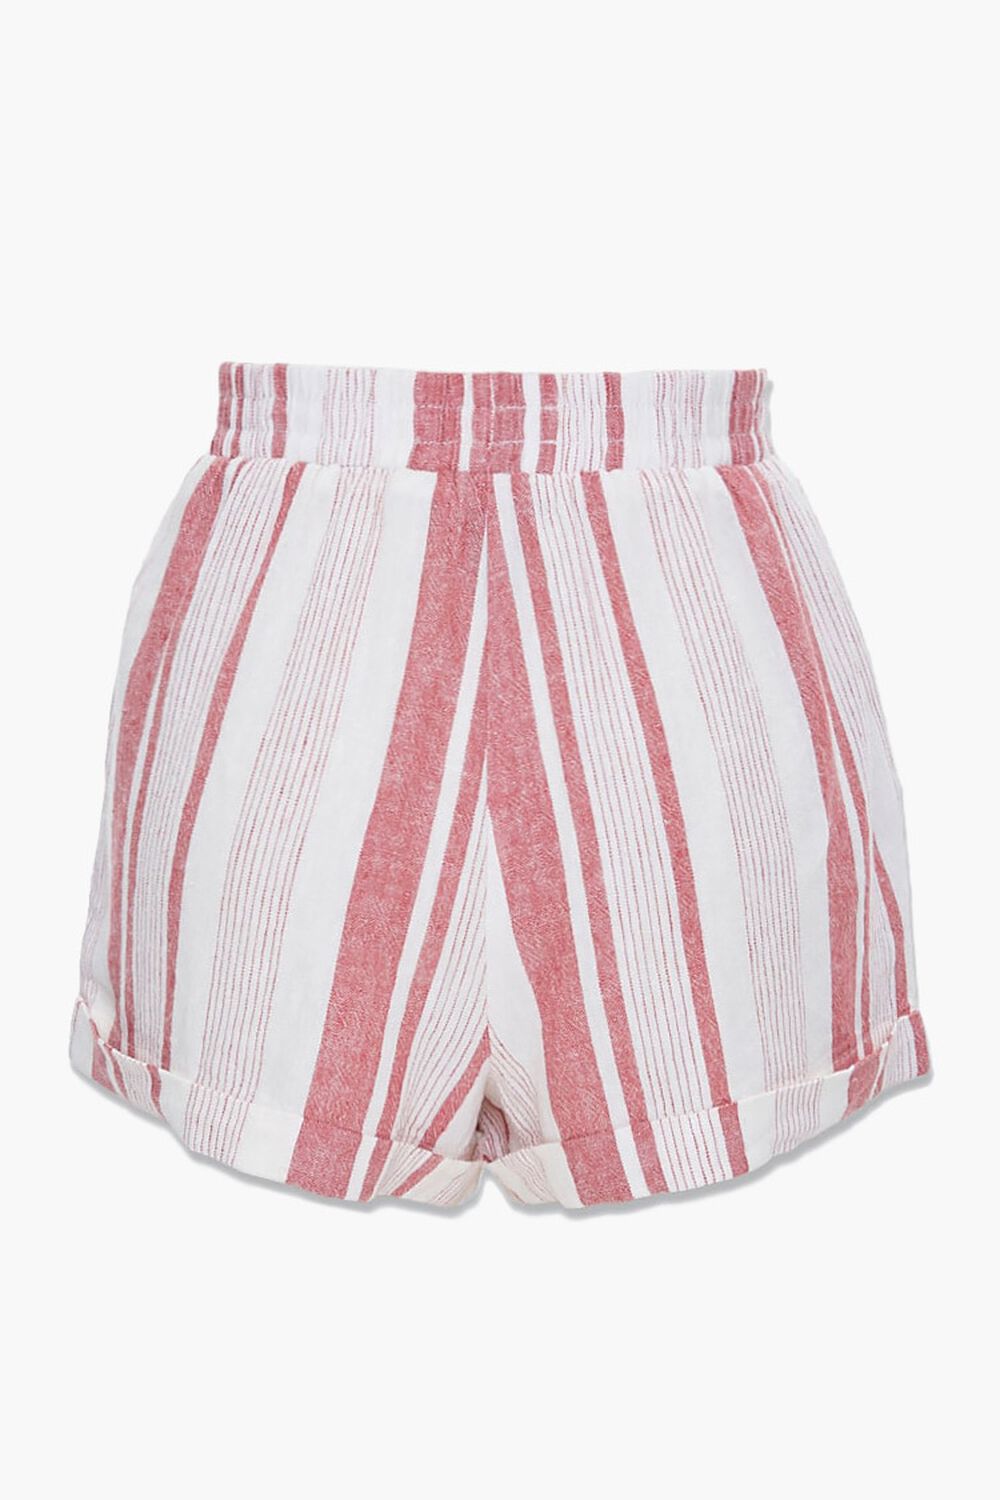 WHITE/RED Striped Linen-Blend Shorts, image 3